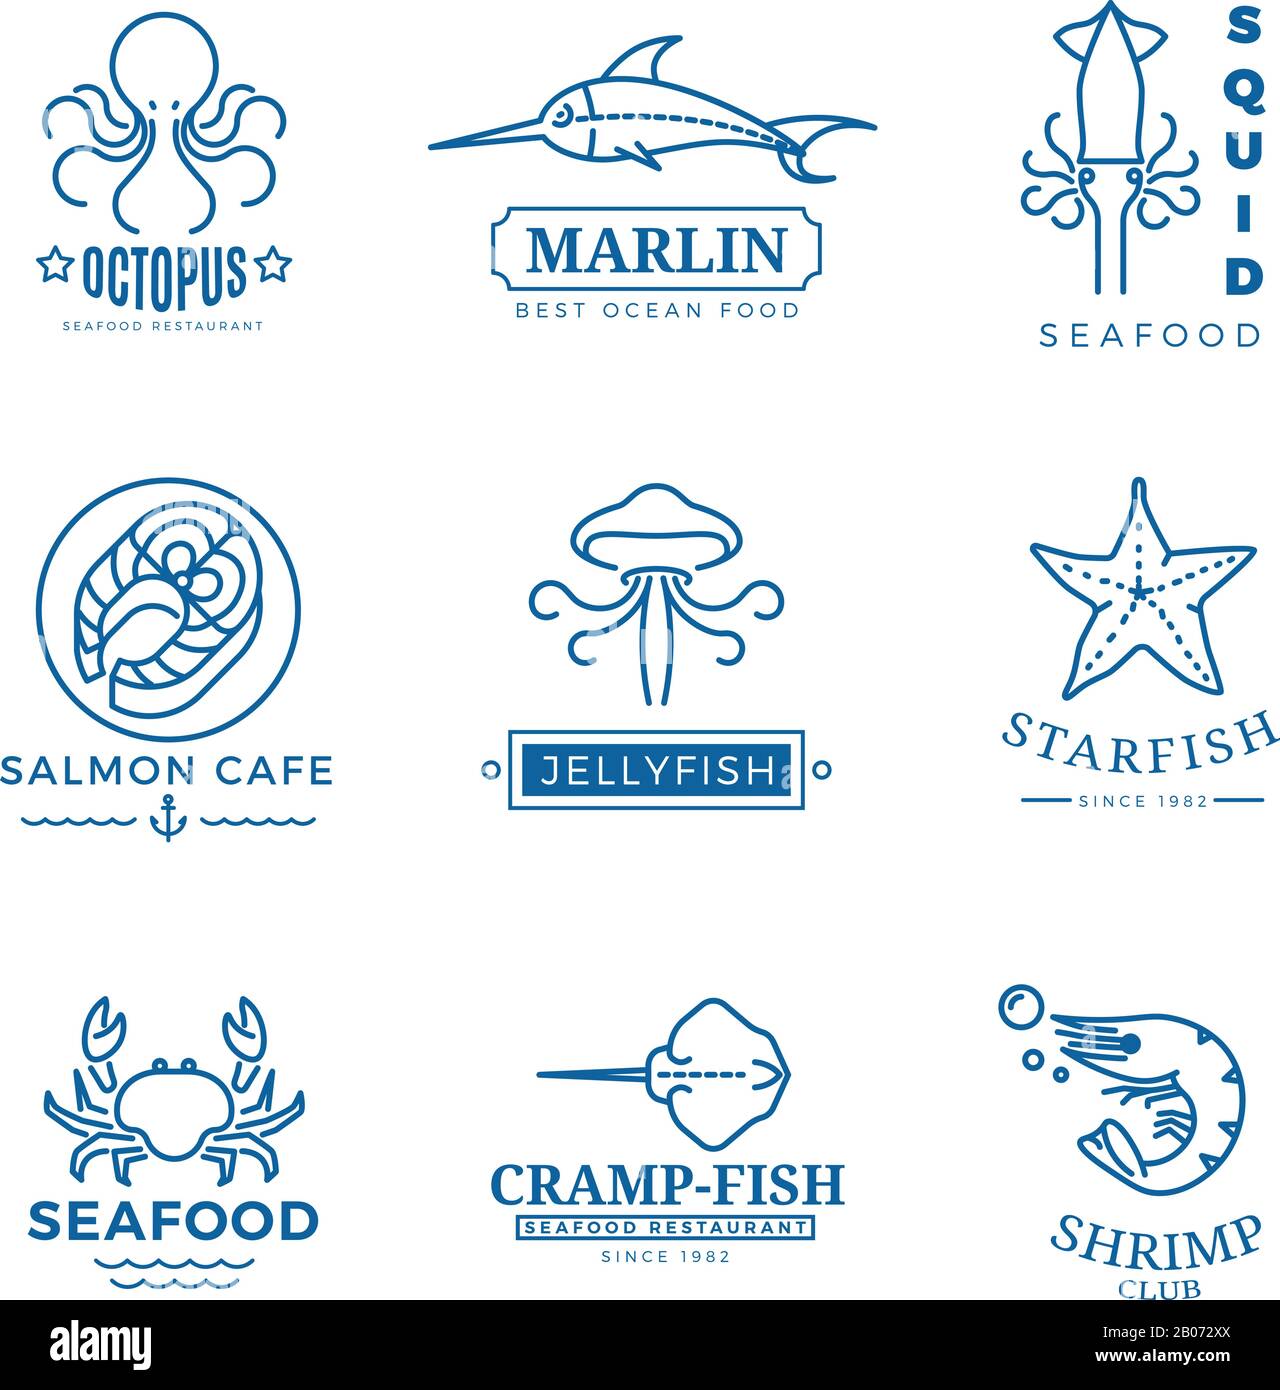 Seafood labels thin line vector labels, logos, emblems for restaurant, fish and octopus illustration Stock Vector